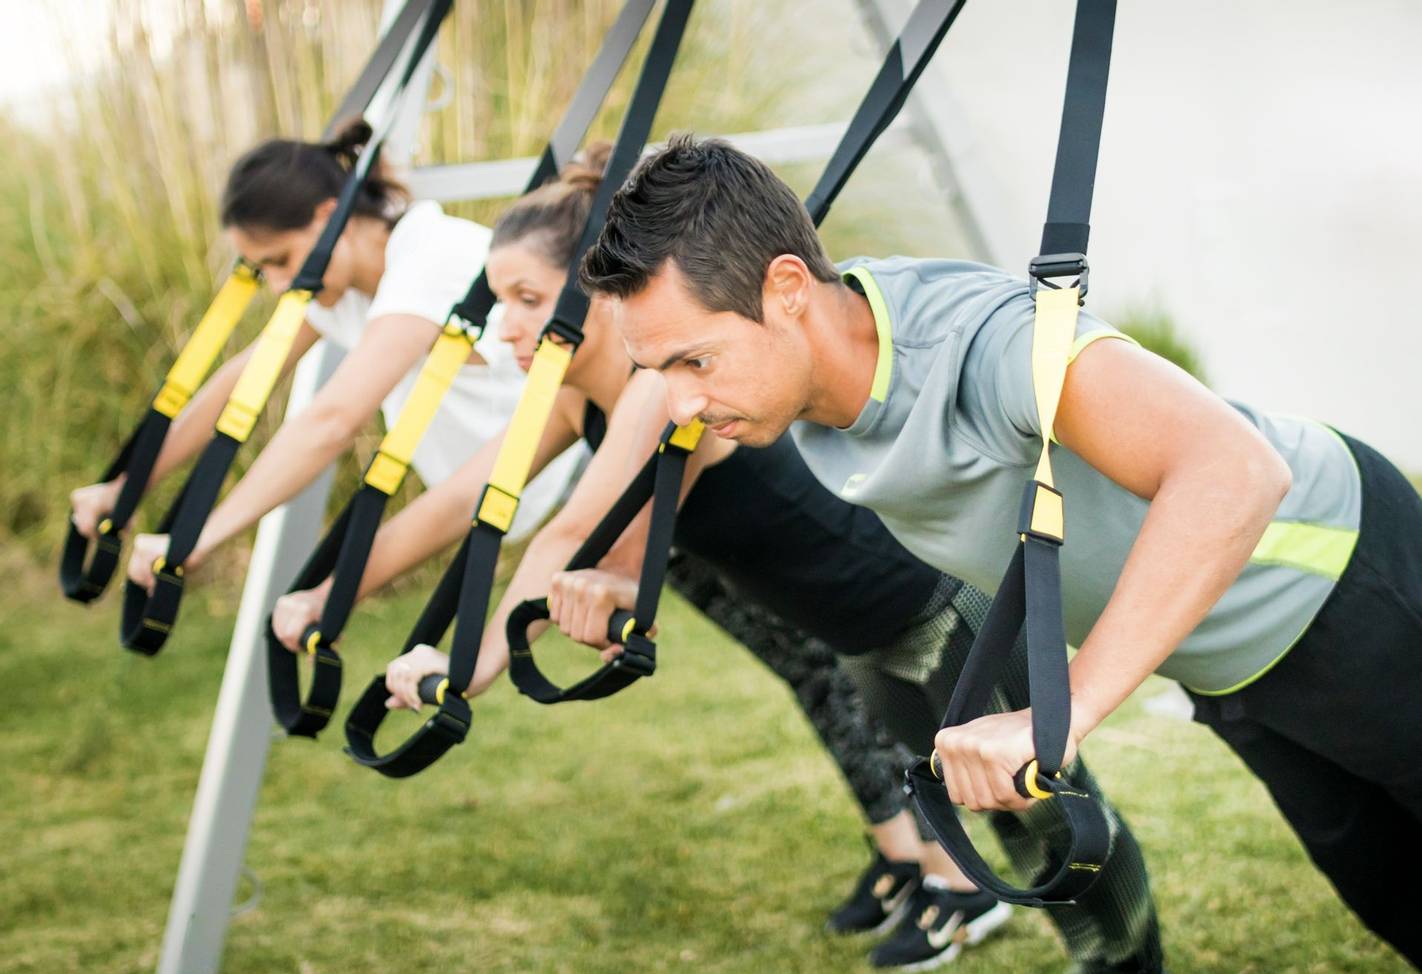 Group TRX training outdoors